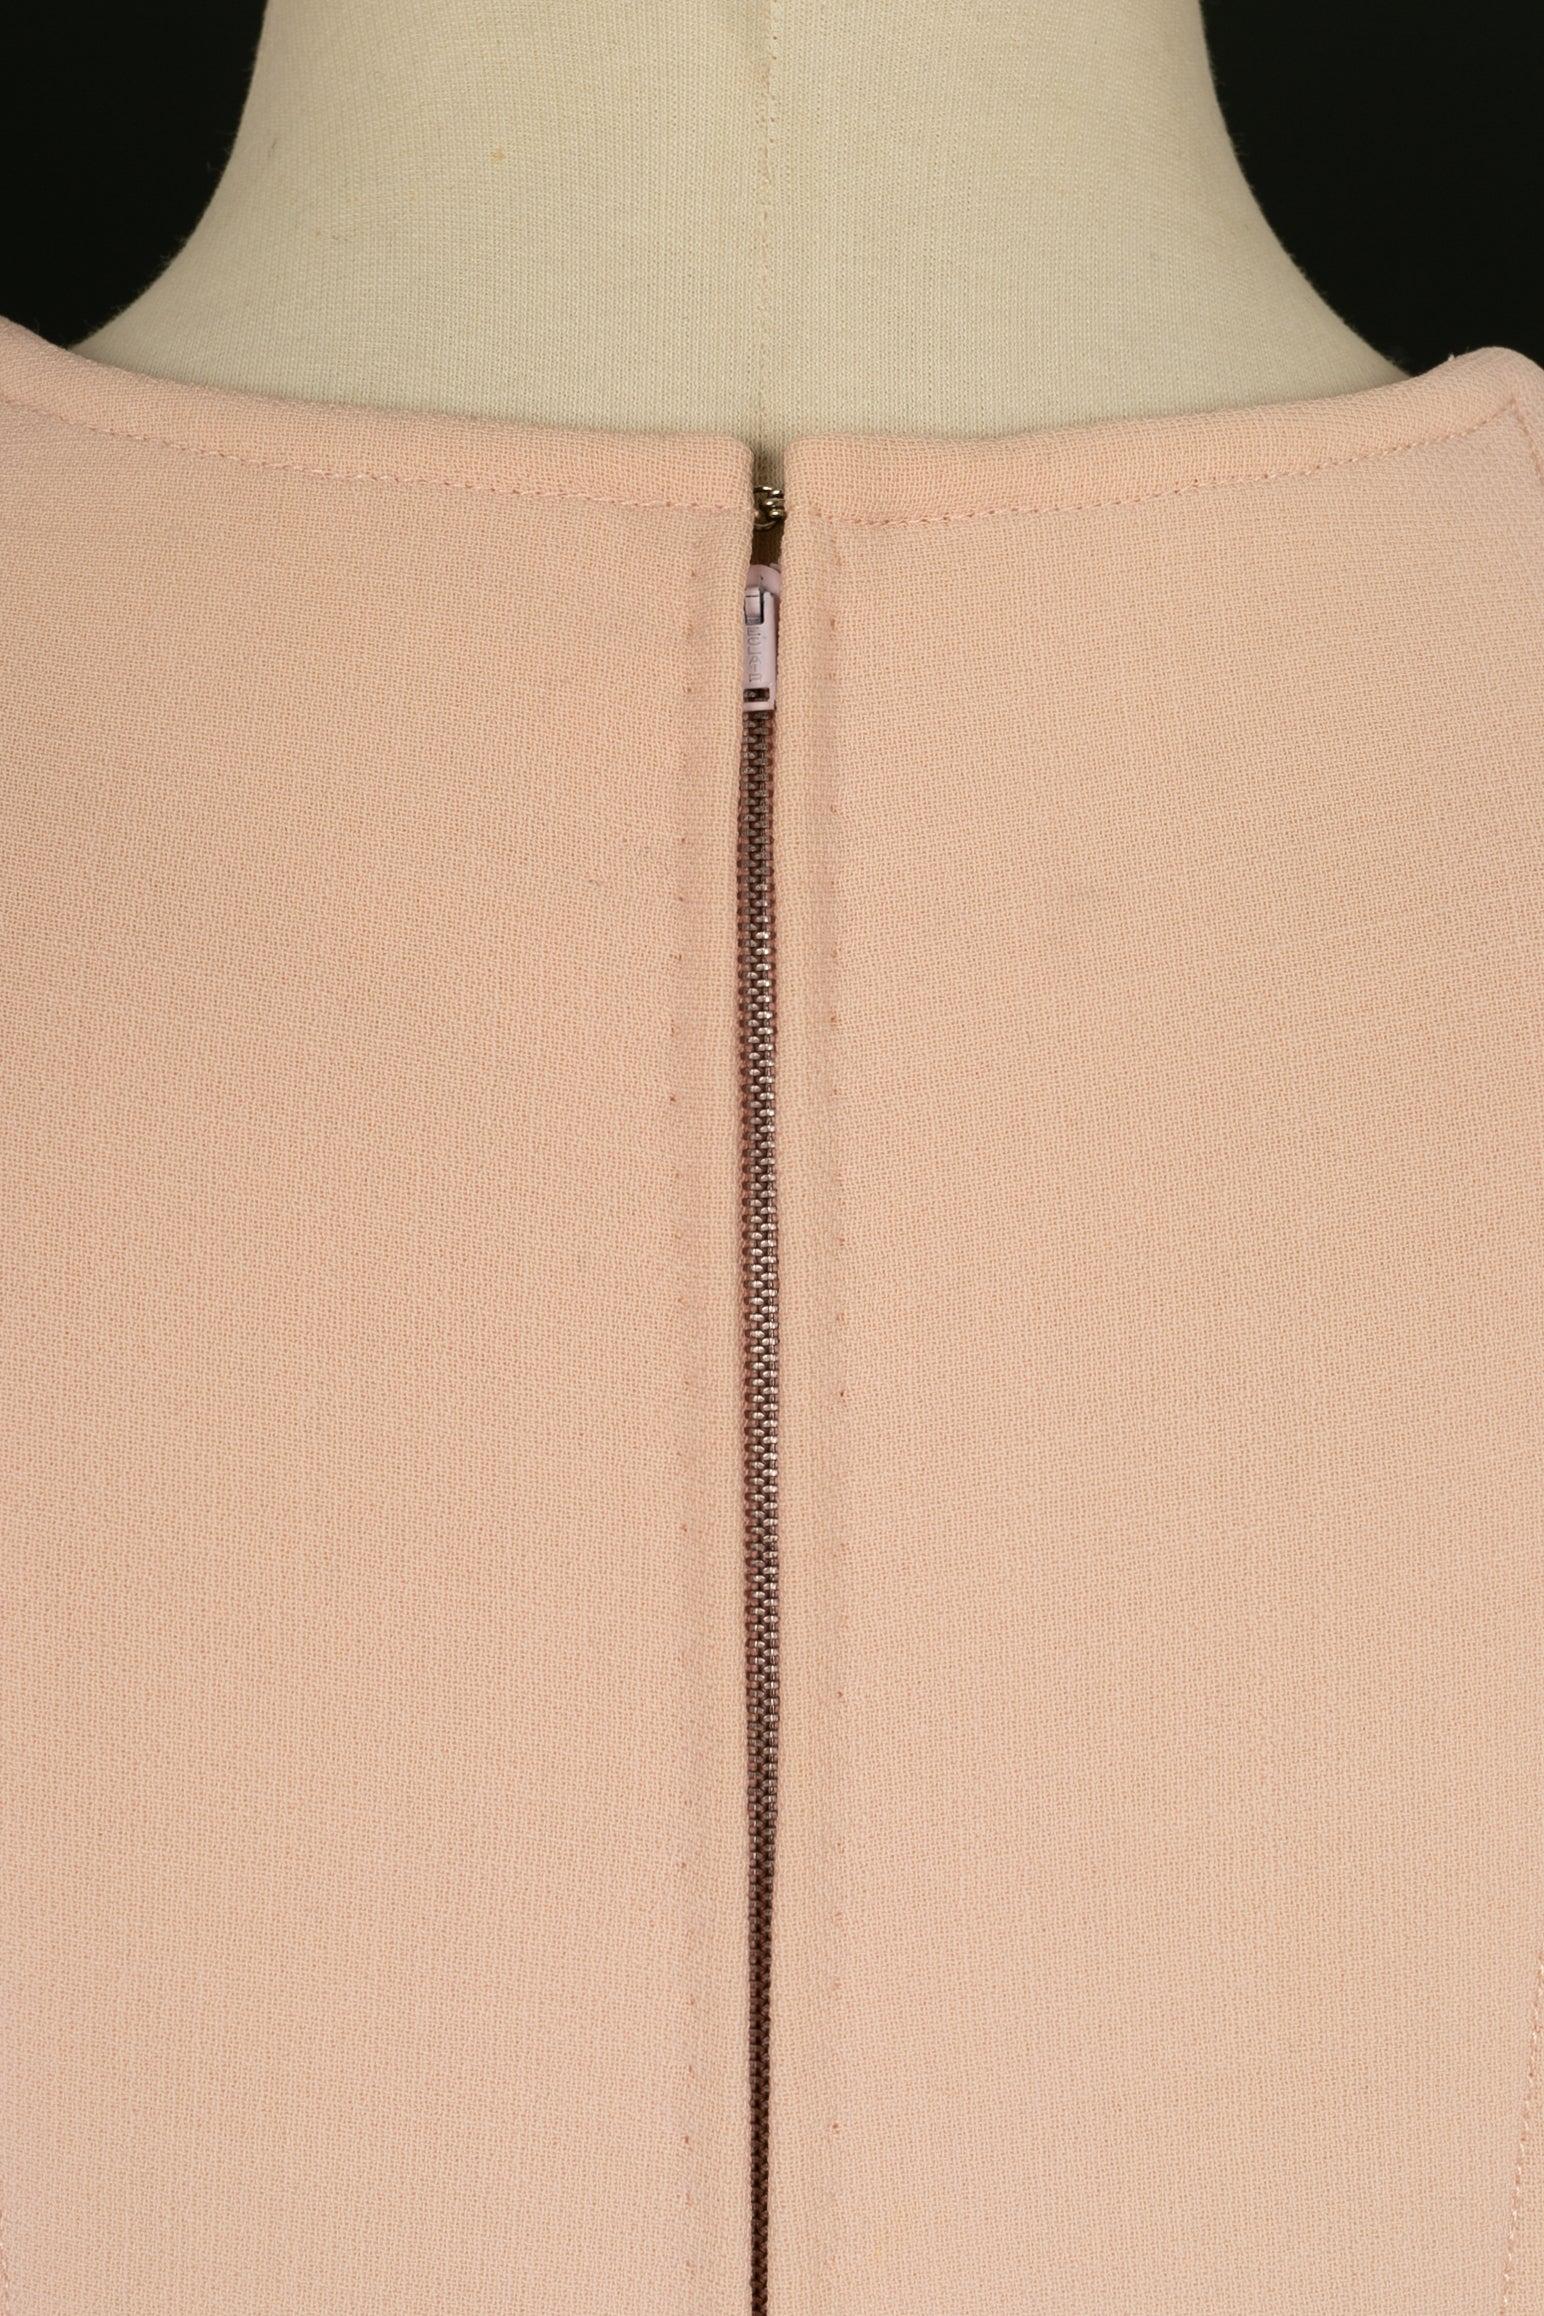 Courrèges Light Pink Dress in Trapeze Shape For Sale 1